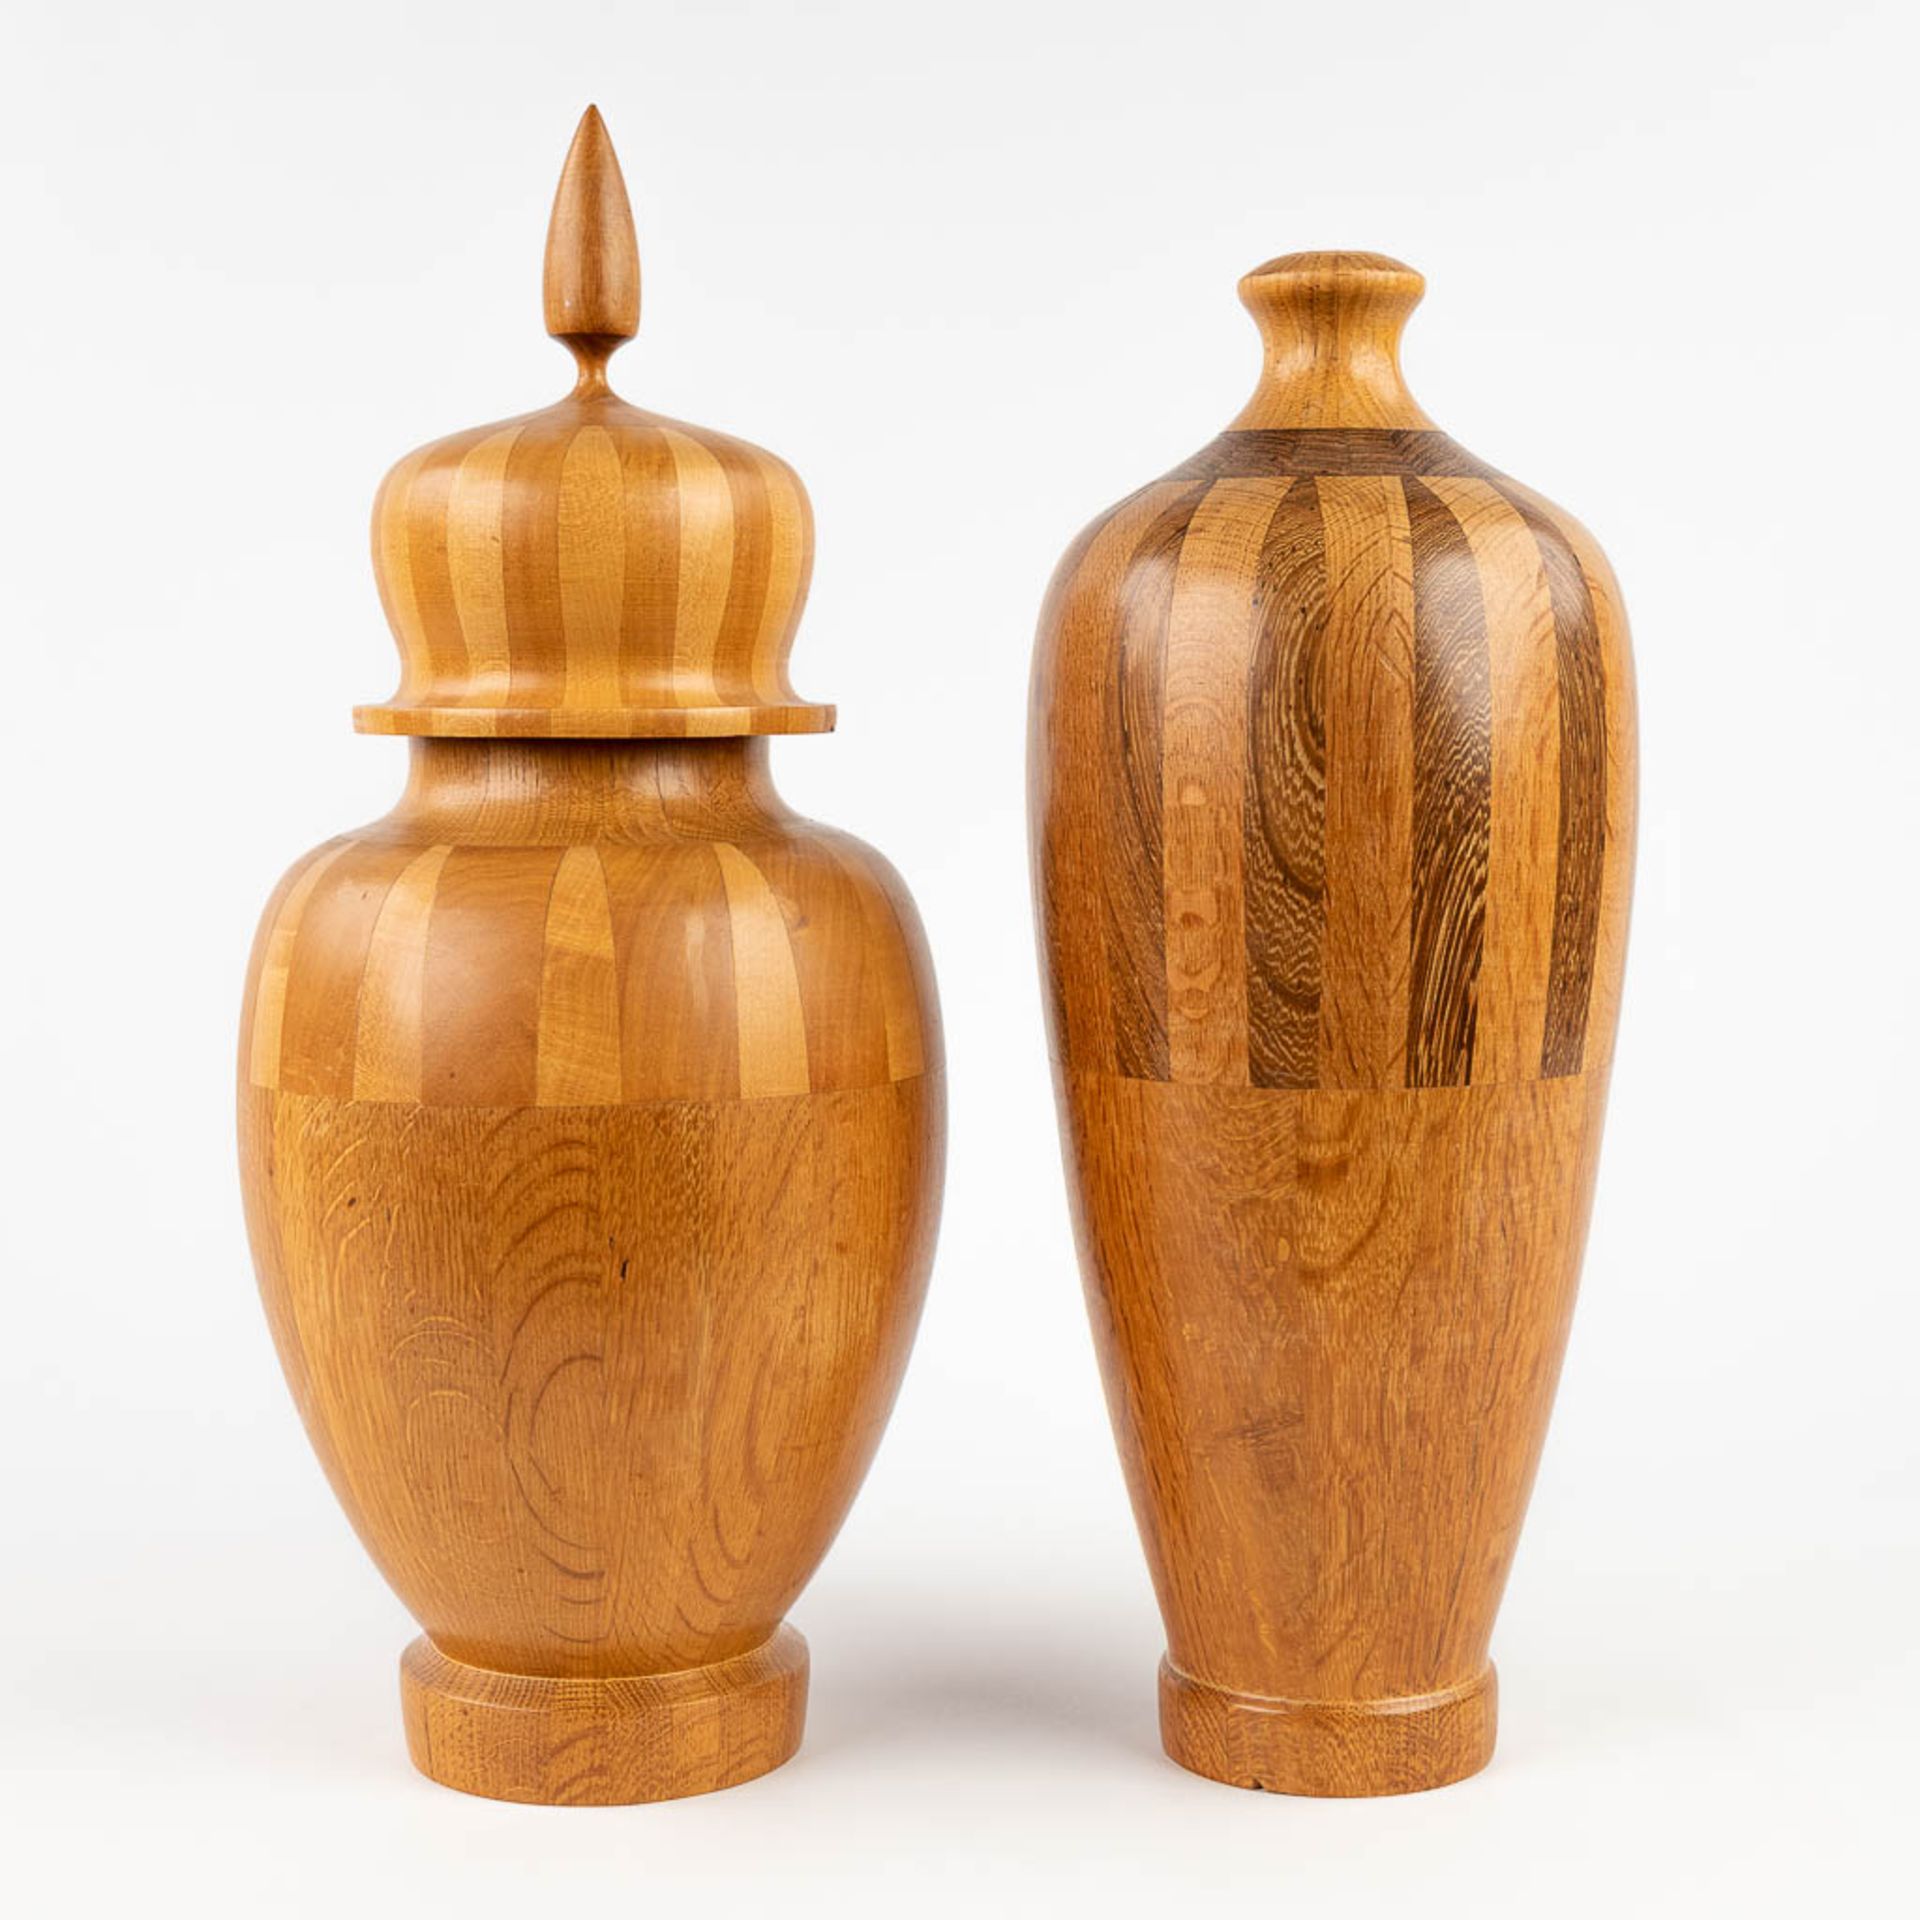 A collection of 2 wood-turned vases, made of wood. circa 1960. (H: 43 x D: 16 cm) - Image 4 of 11